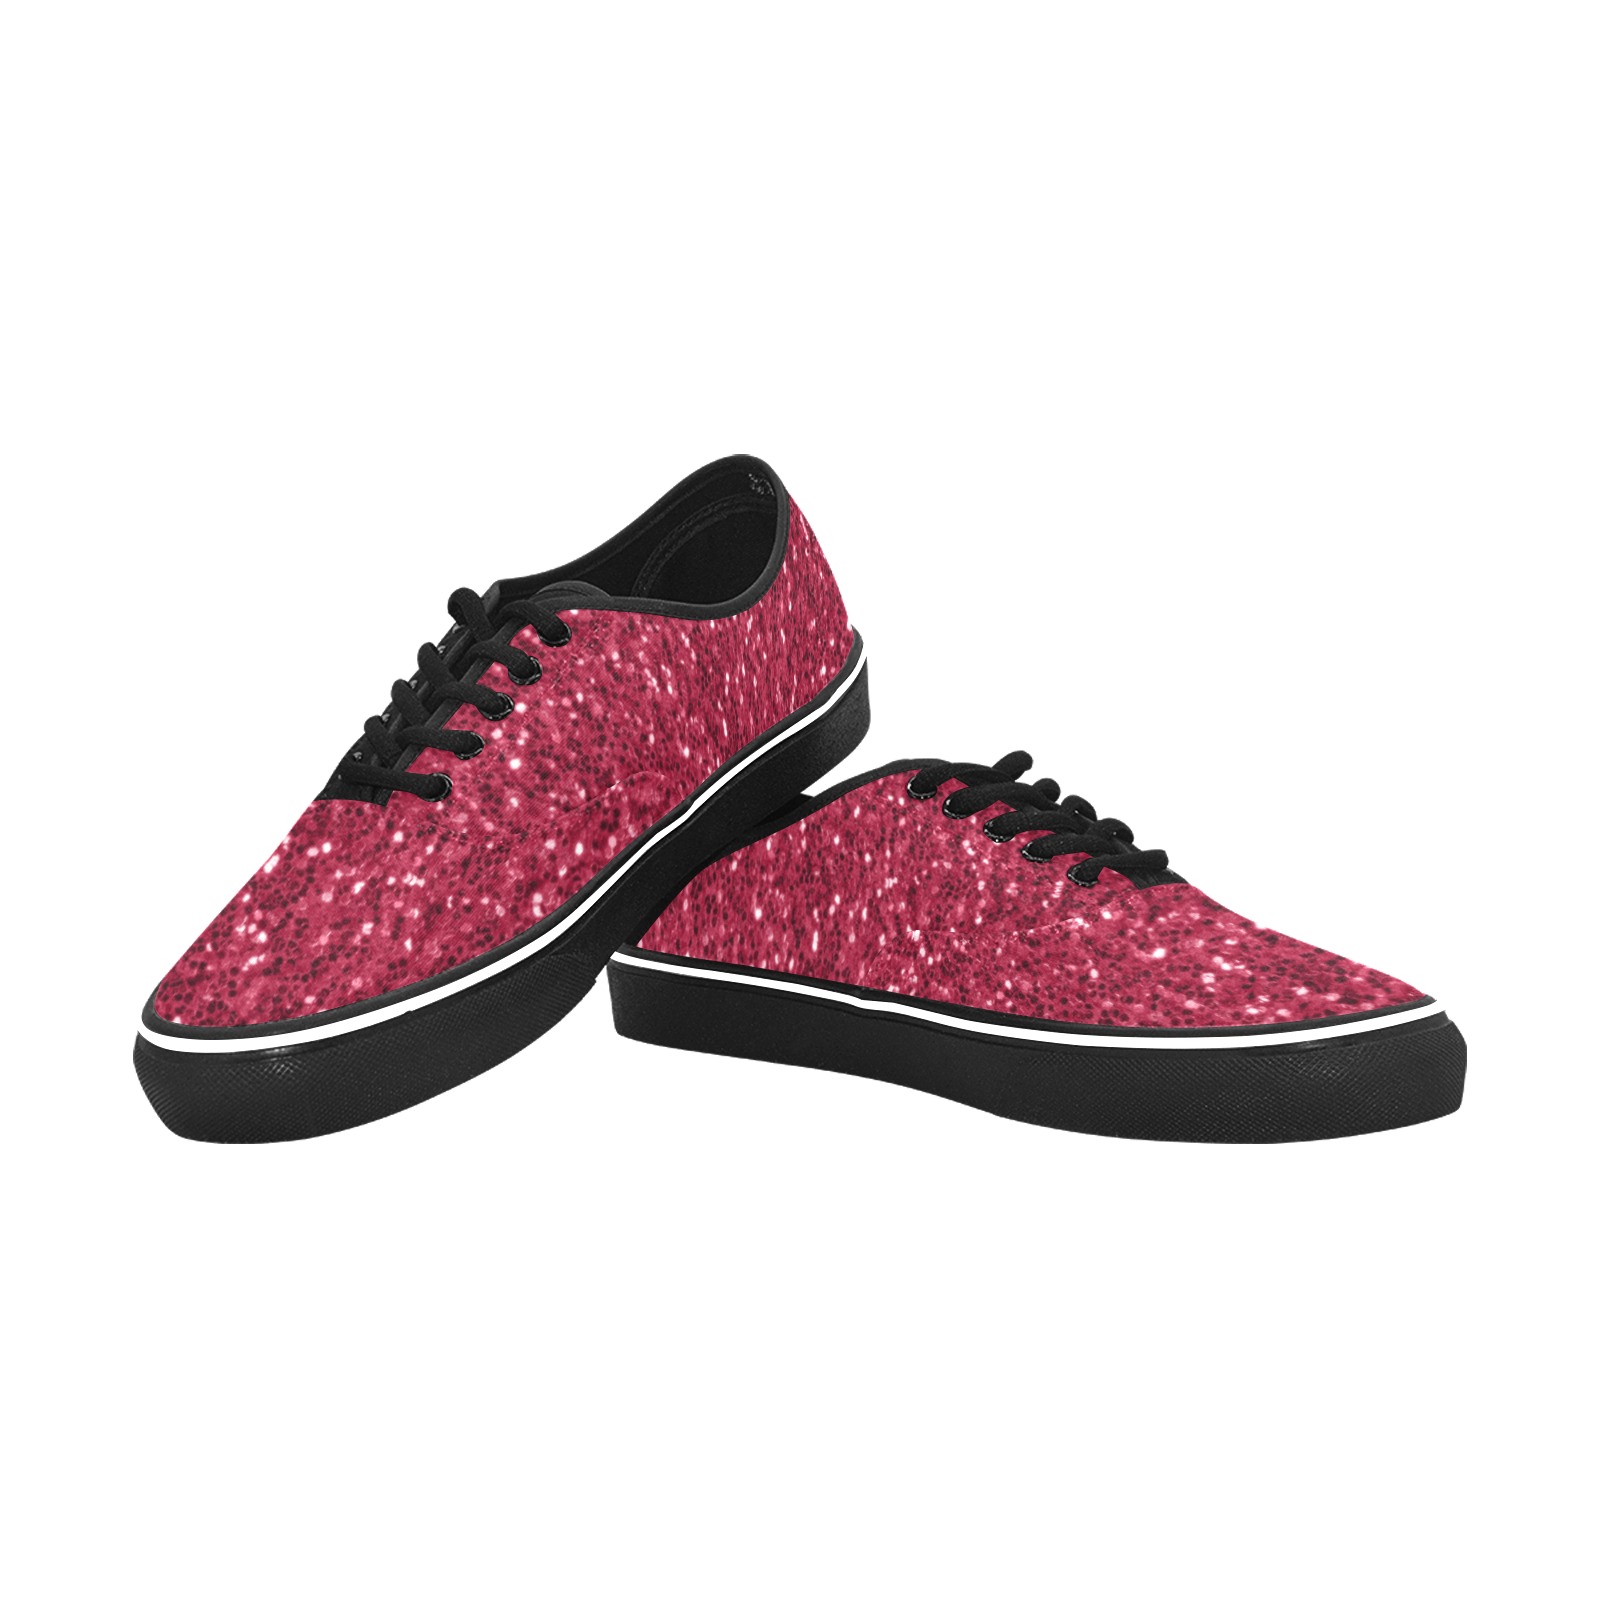 Magenta dark pink red faux sparkles glitter Classic Women's Canvas Low Top Shoes (Model E001-4)